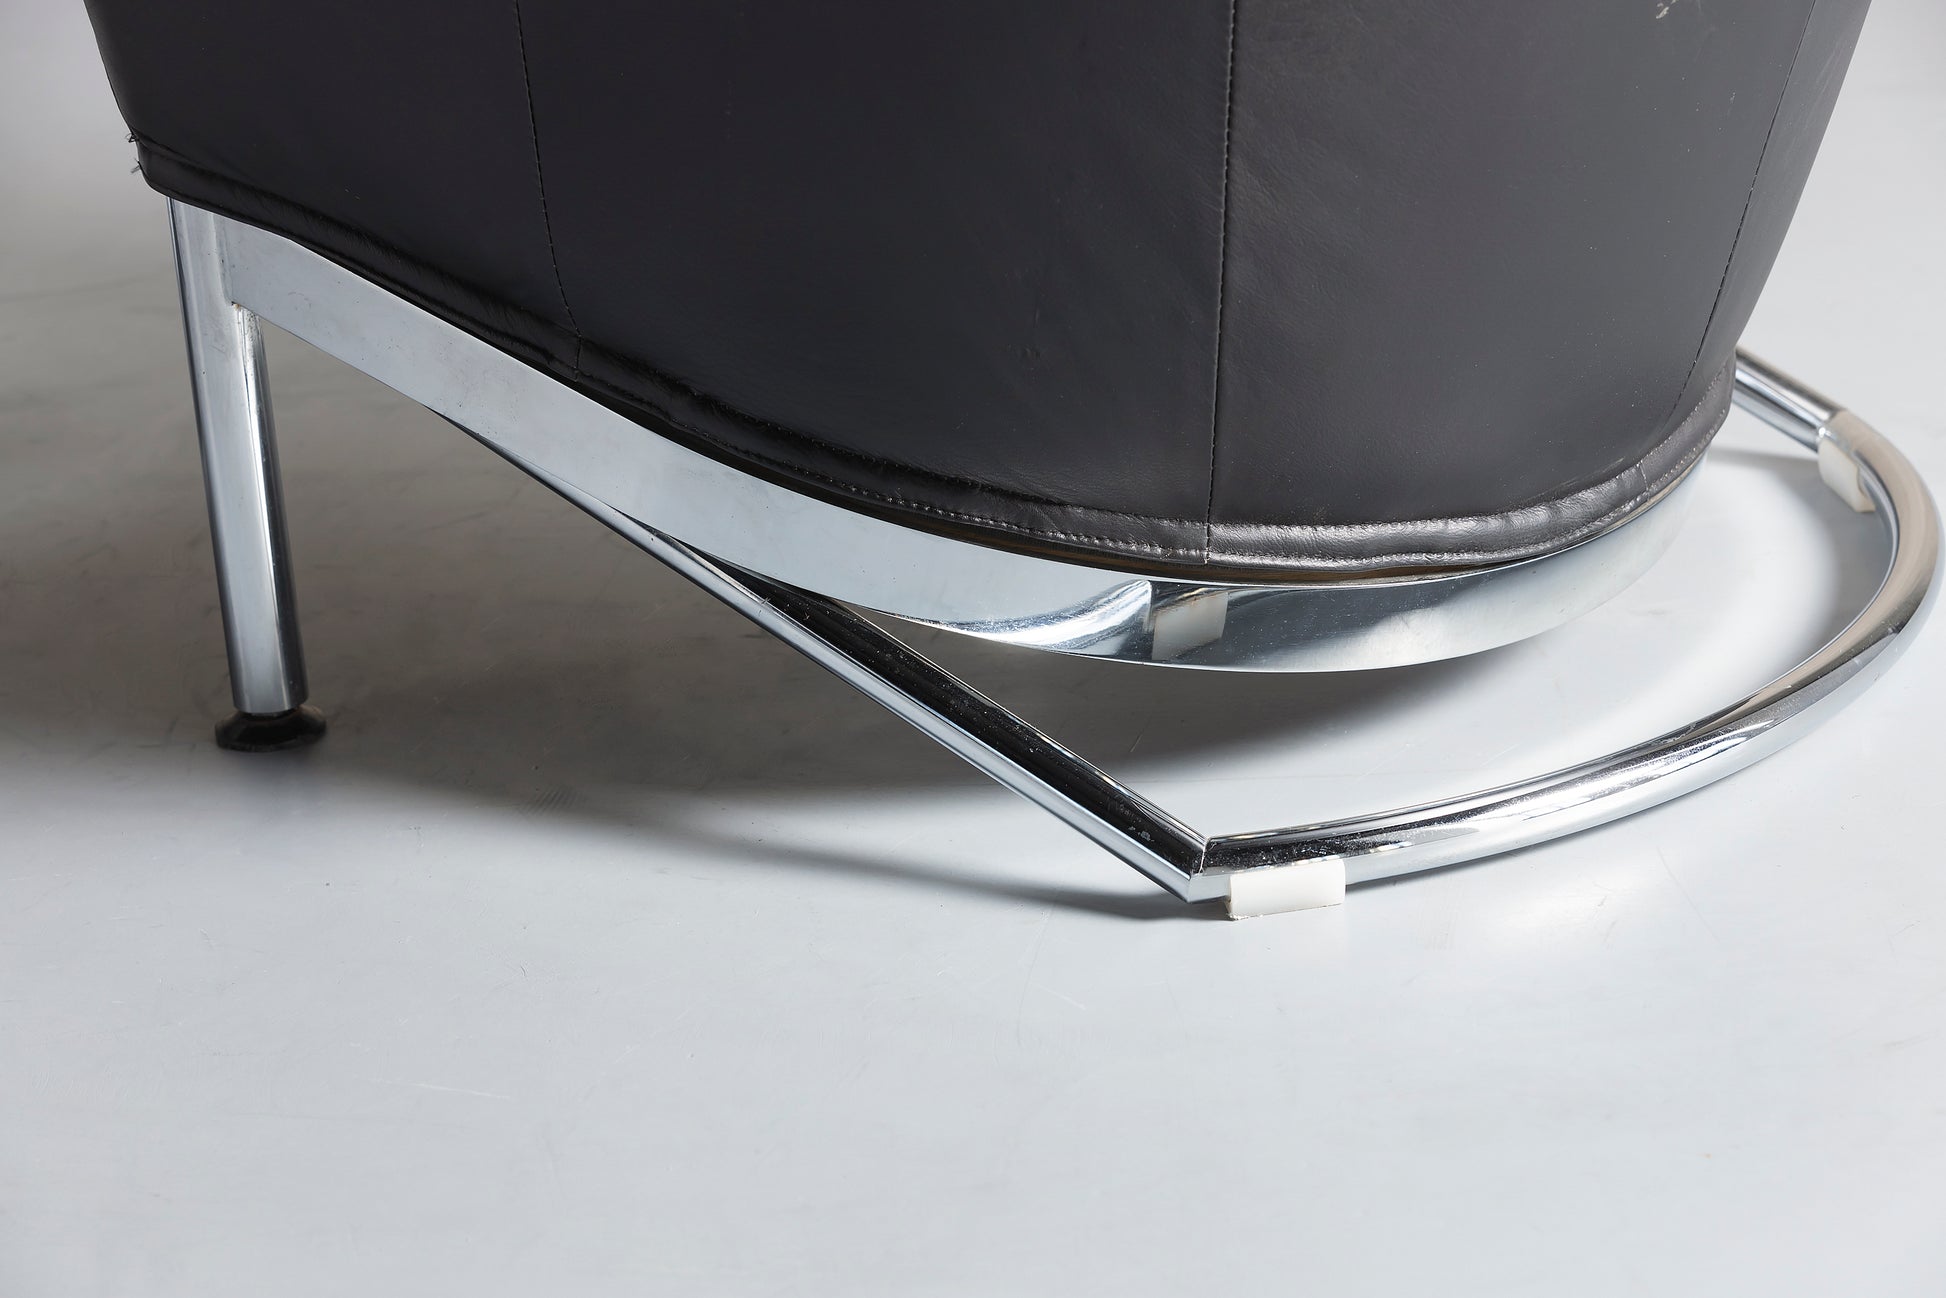 Chrome legs of a black leather chair